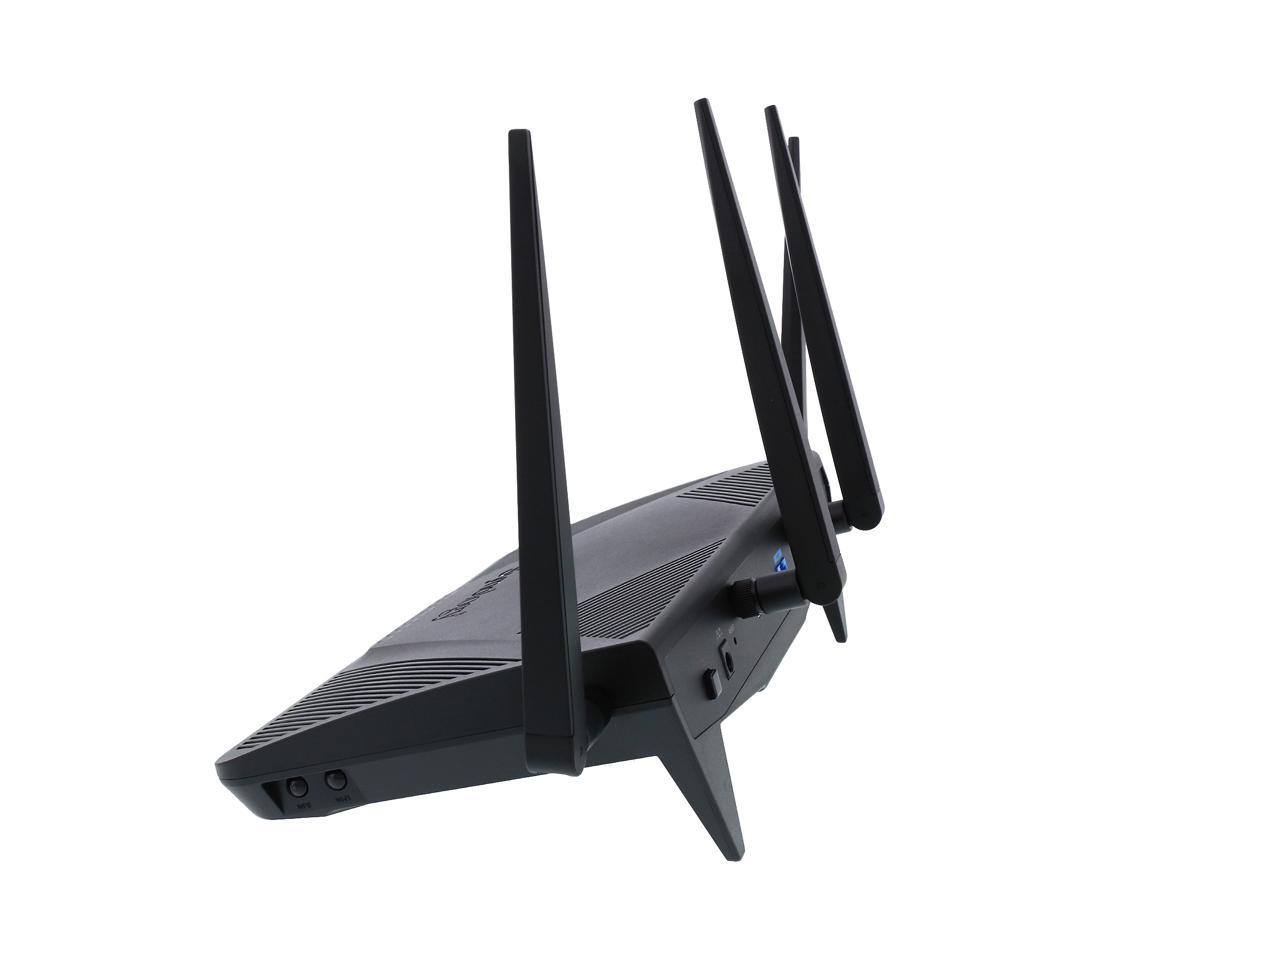 SYNOLOGY RT2600ac Wi-Fi AC 2600 Gigabit Router